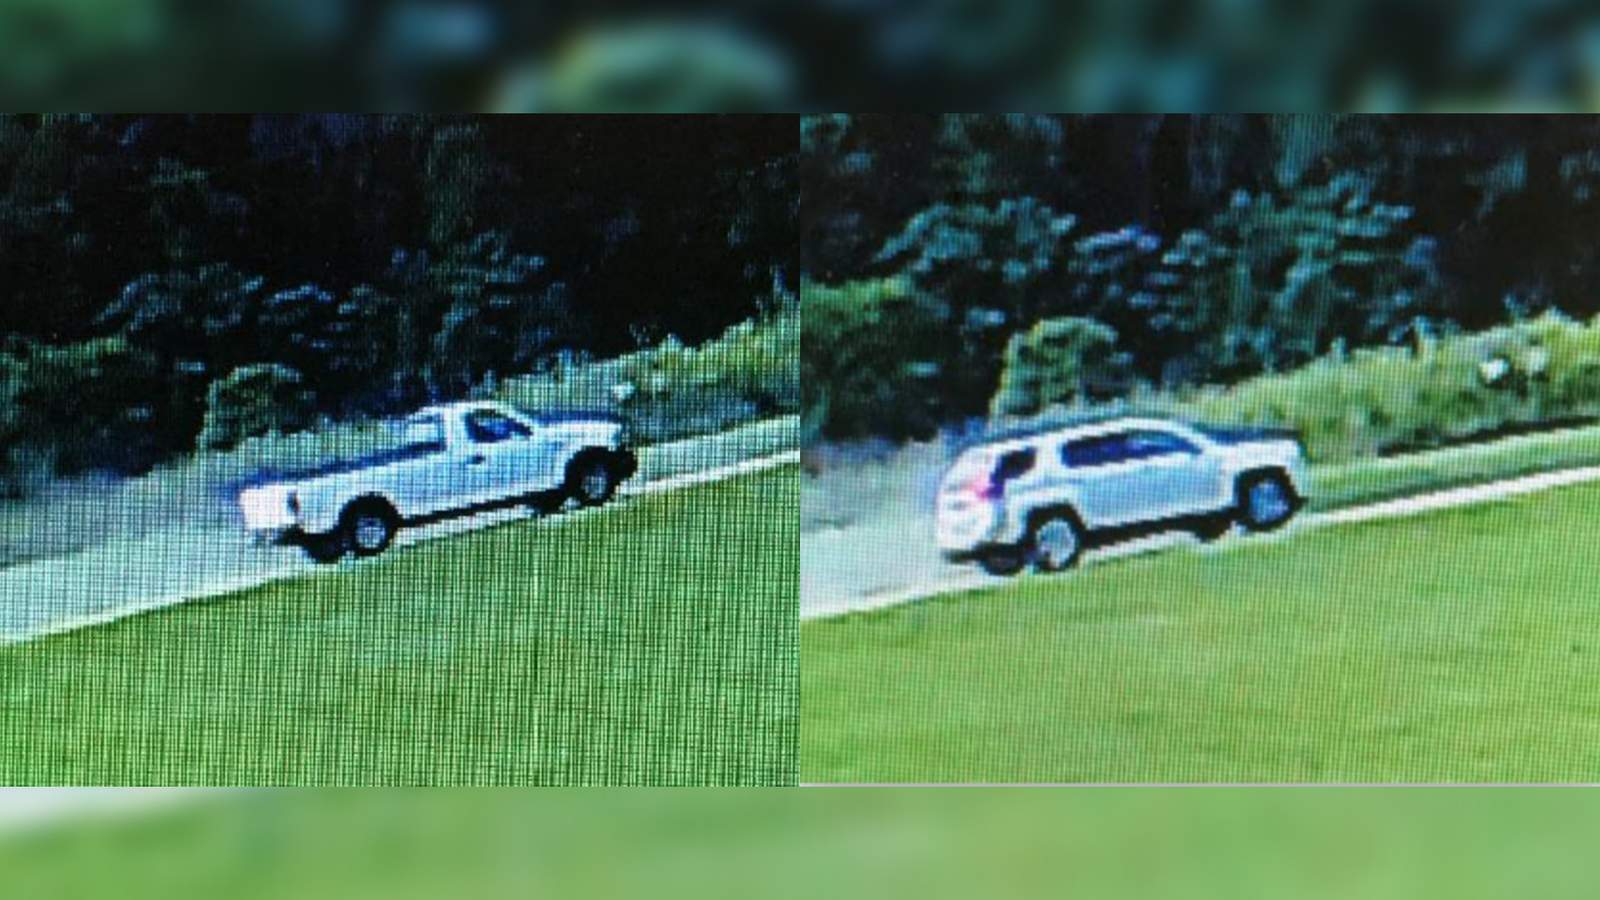 Campbell County authorities ask for help identifying suspects in breaking and entering case